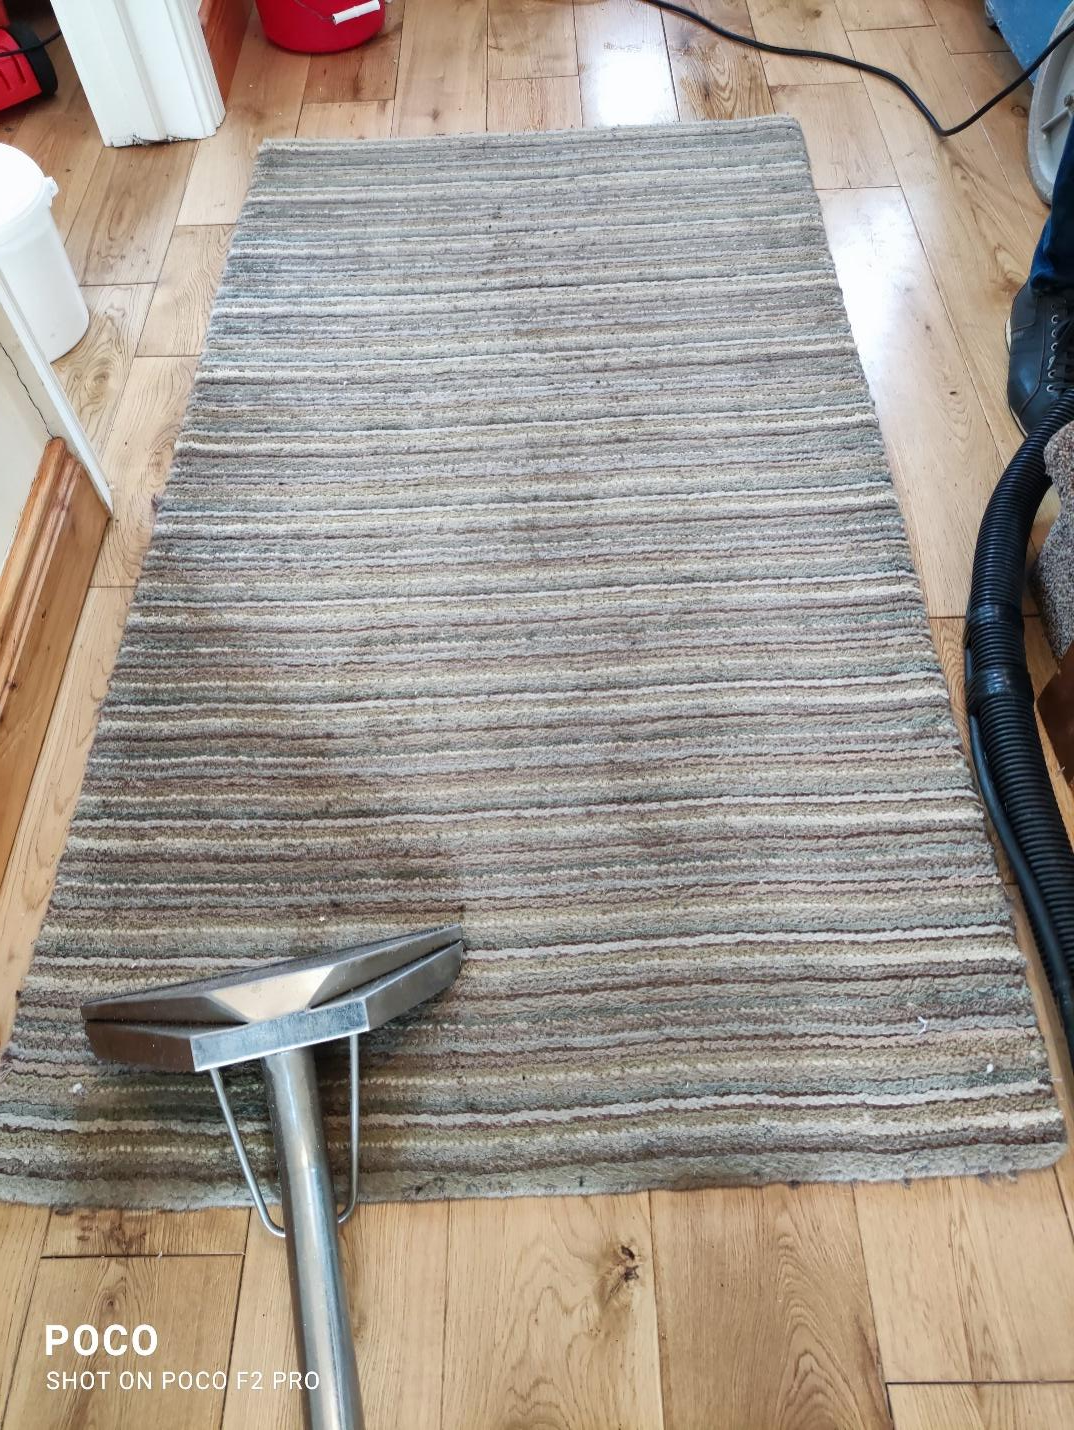 //www.sandyfordcarpetcleaning.ie/wp-content/uploads/2017/06/Picture16.png